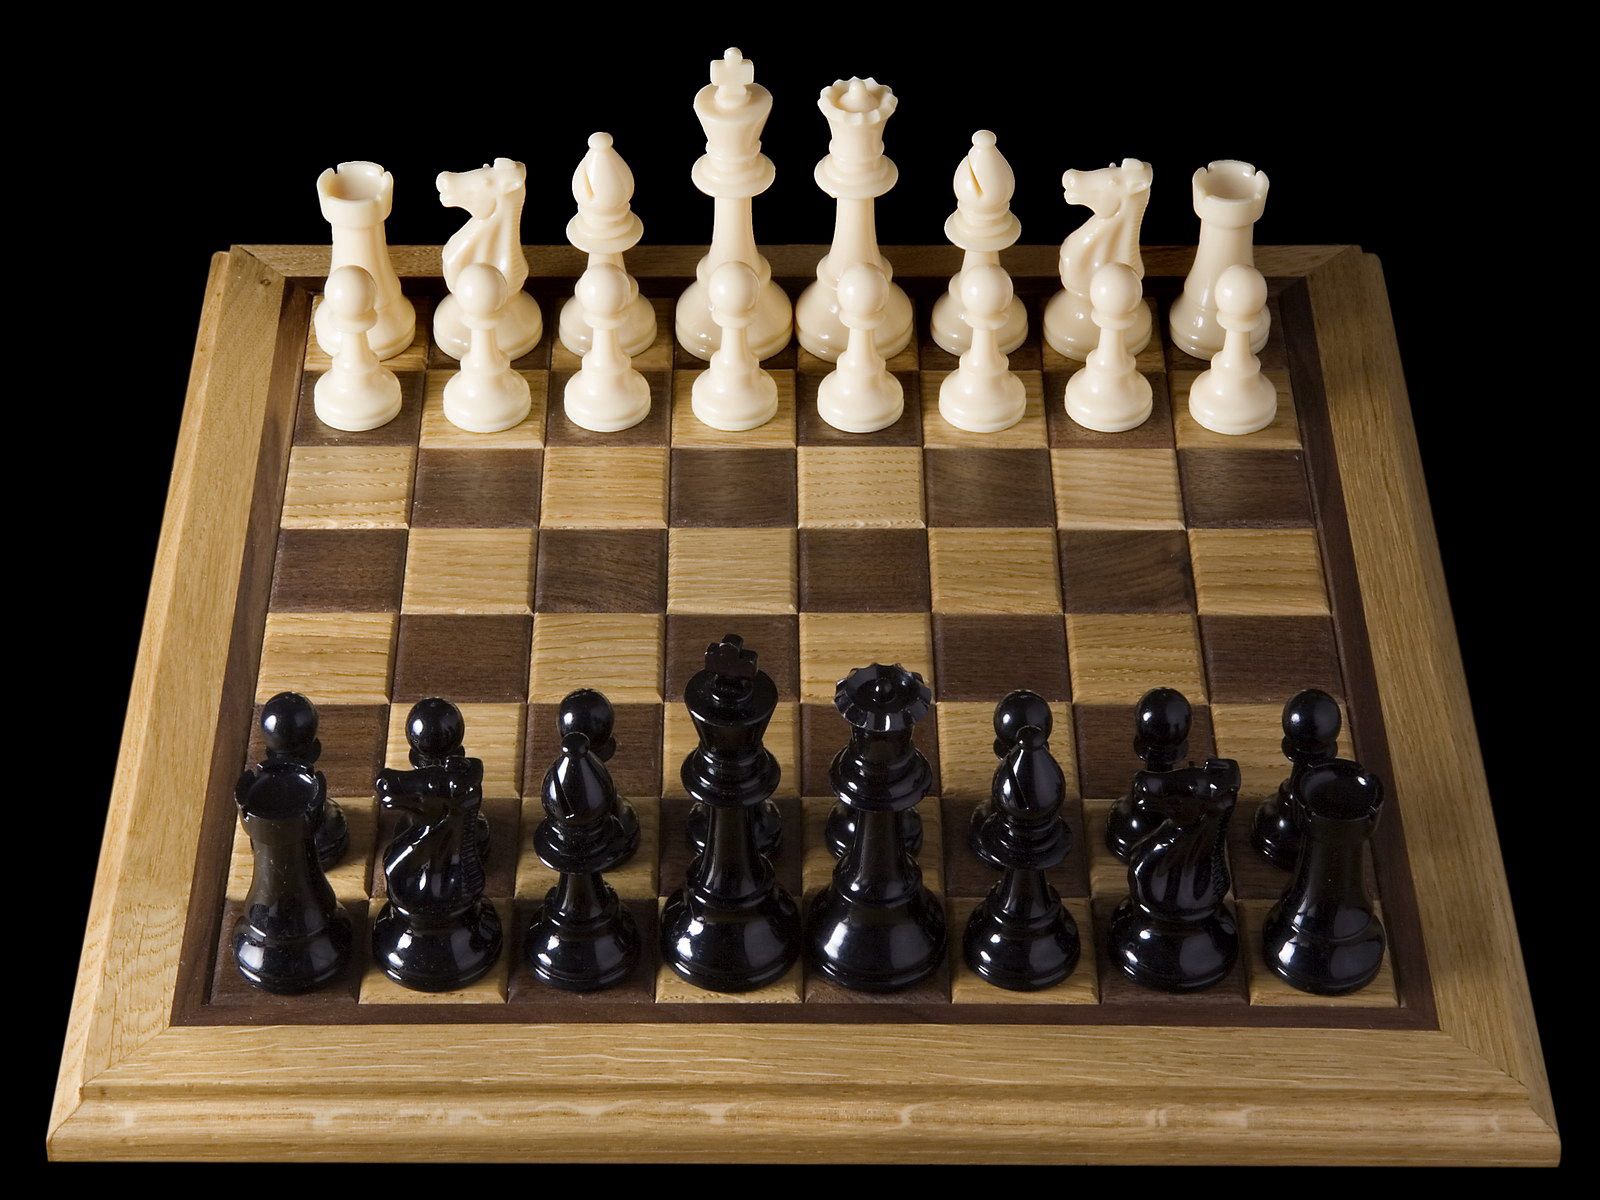 chess, consignment, sports, black, white, shapes, shape, game, board, party